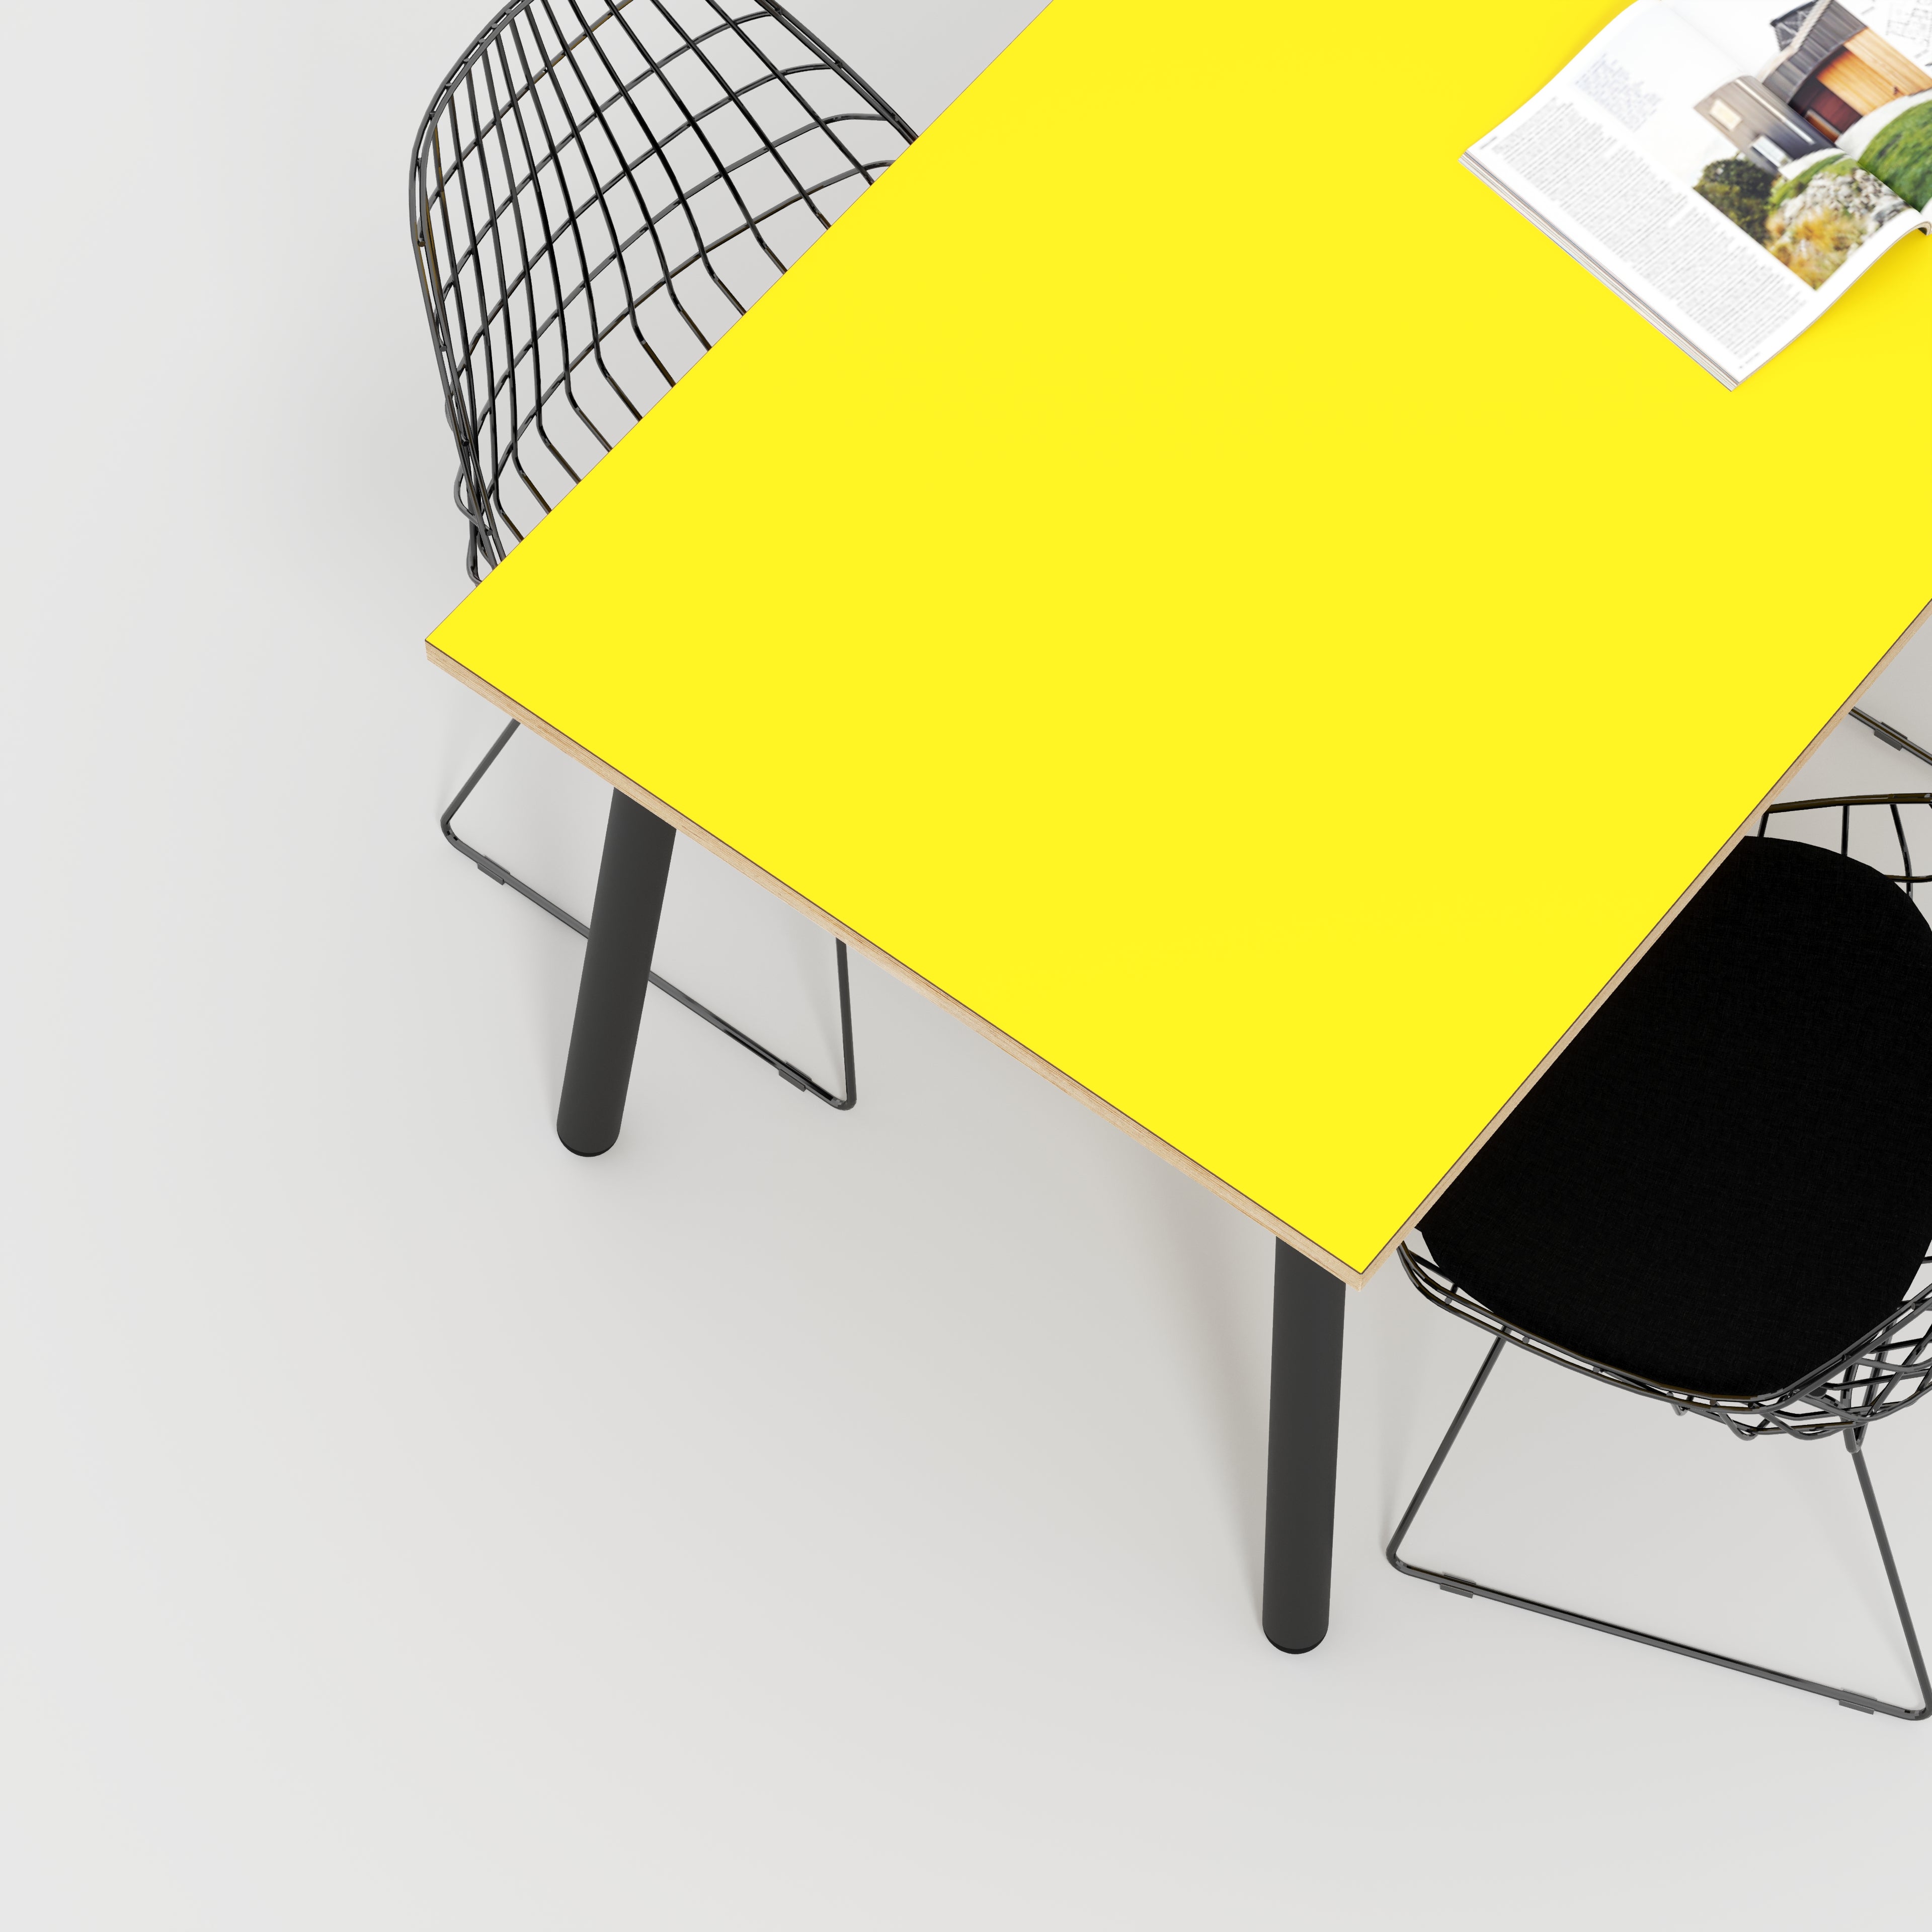 Table with Black Round Single Pin Legs - Formica Chrome Yellow - 1600(w) x 735(h)